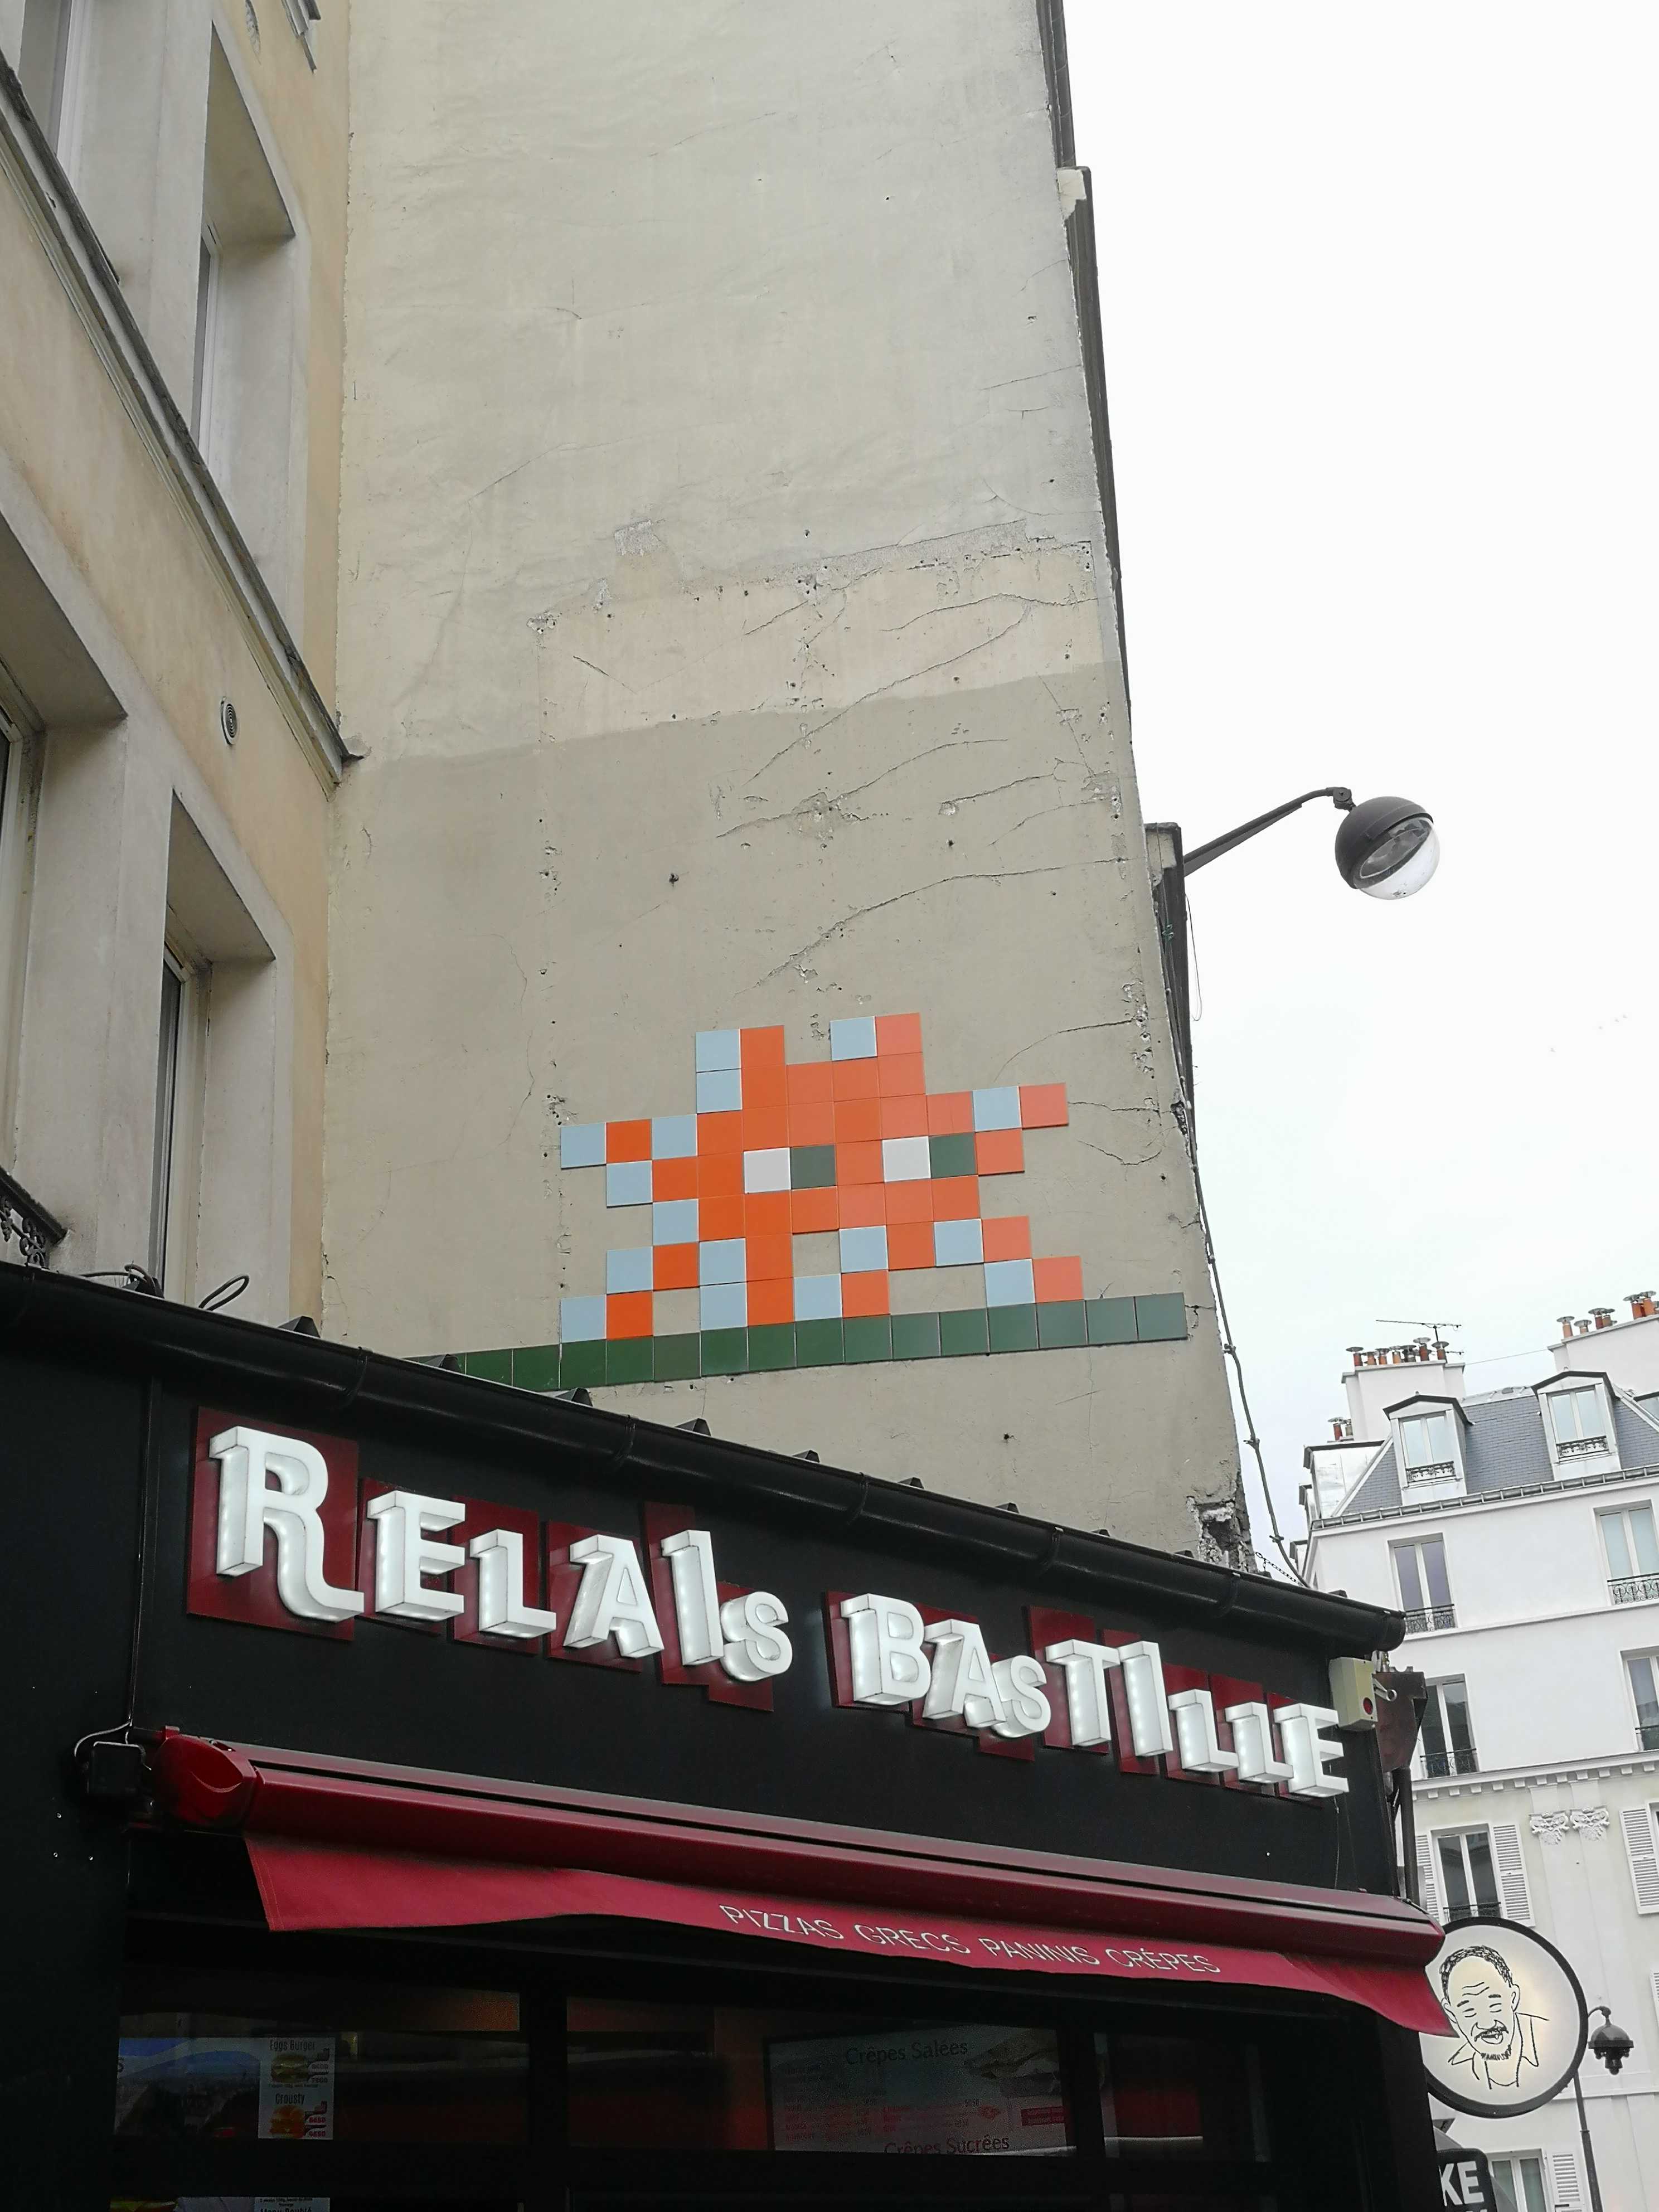 Mosaic 3891  by the artist Invader captured by Rabot in Paris France